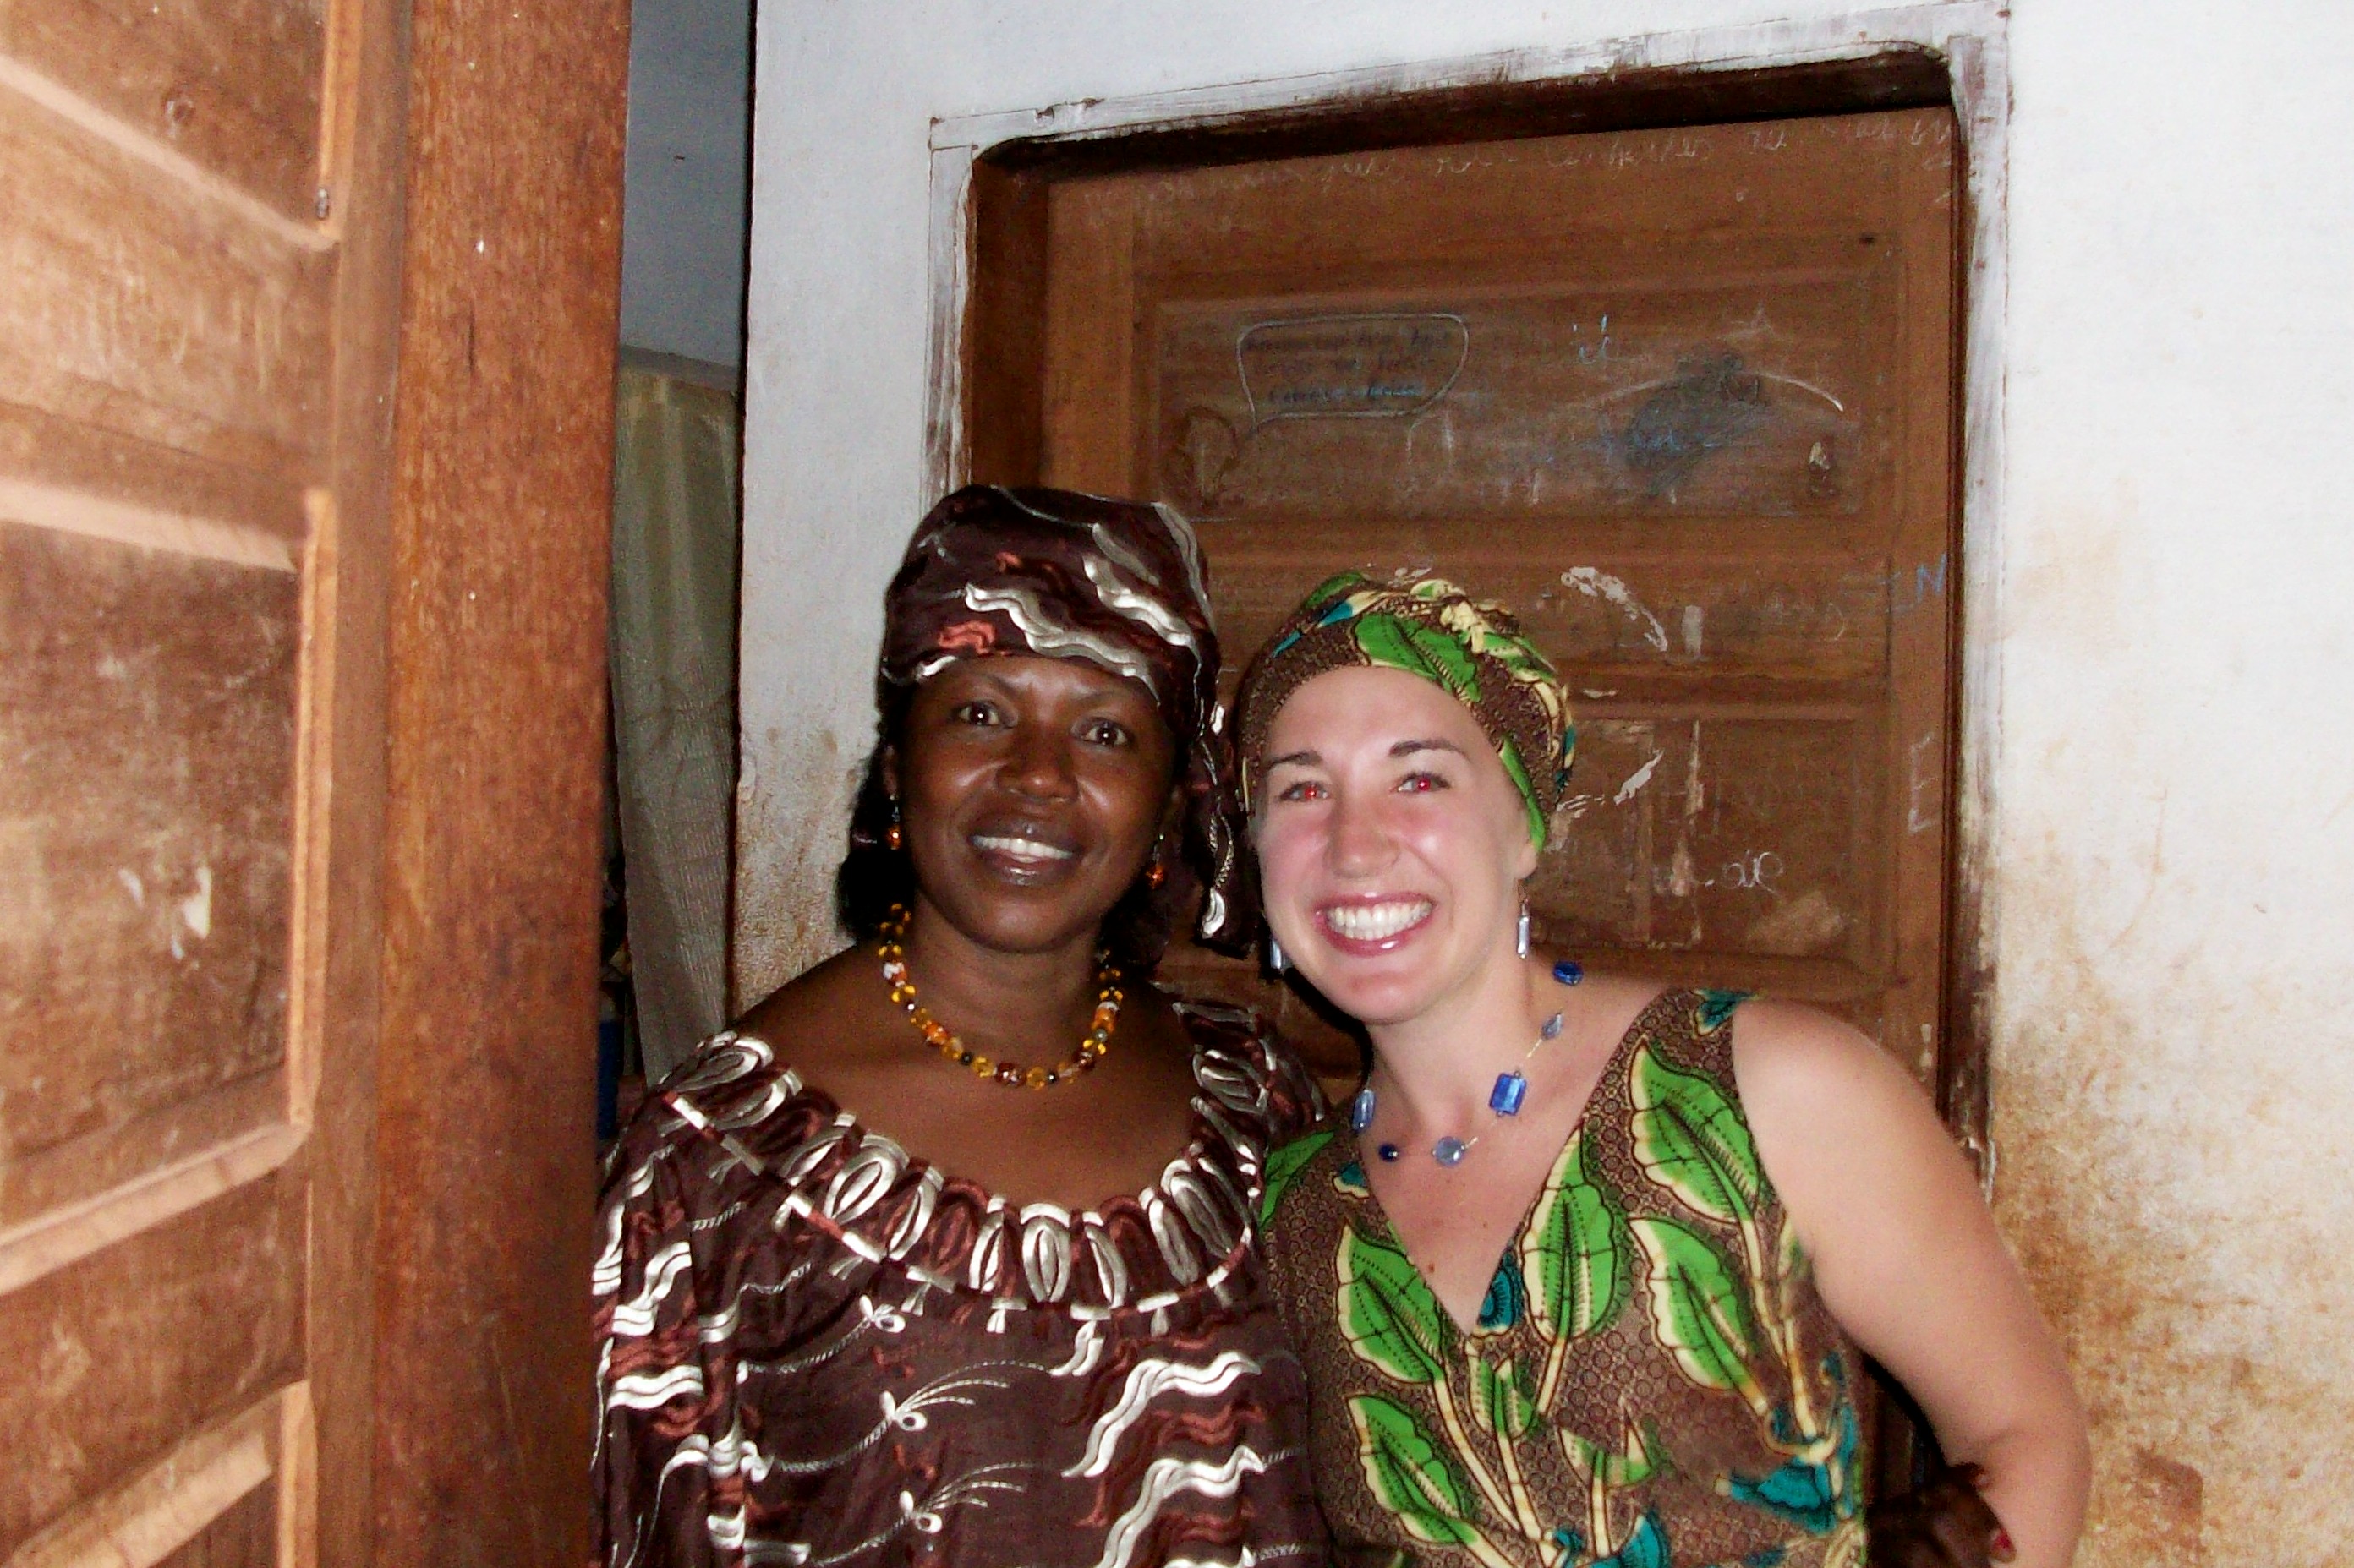 Ashley with her host mom while serving as a Peace Corps Volunteer in Manjo, Cameroon